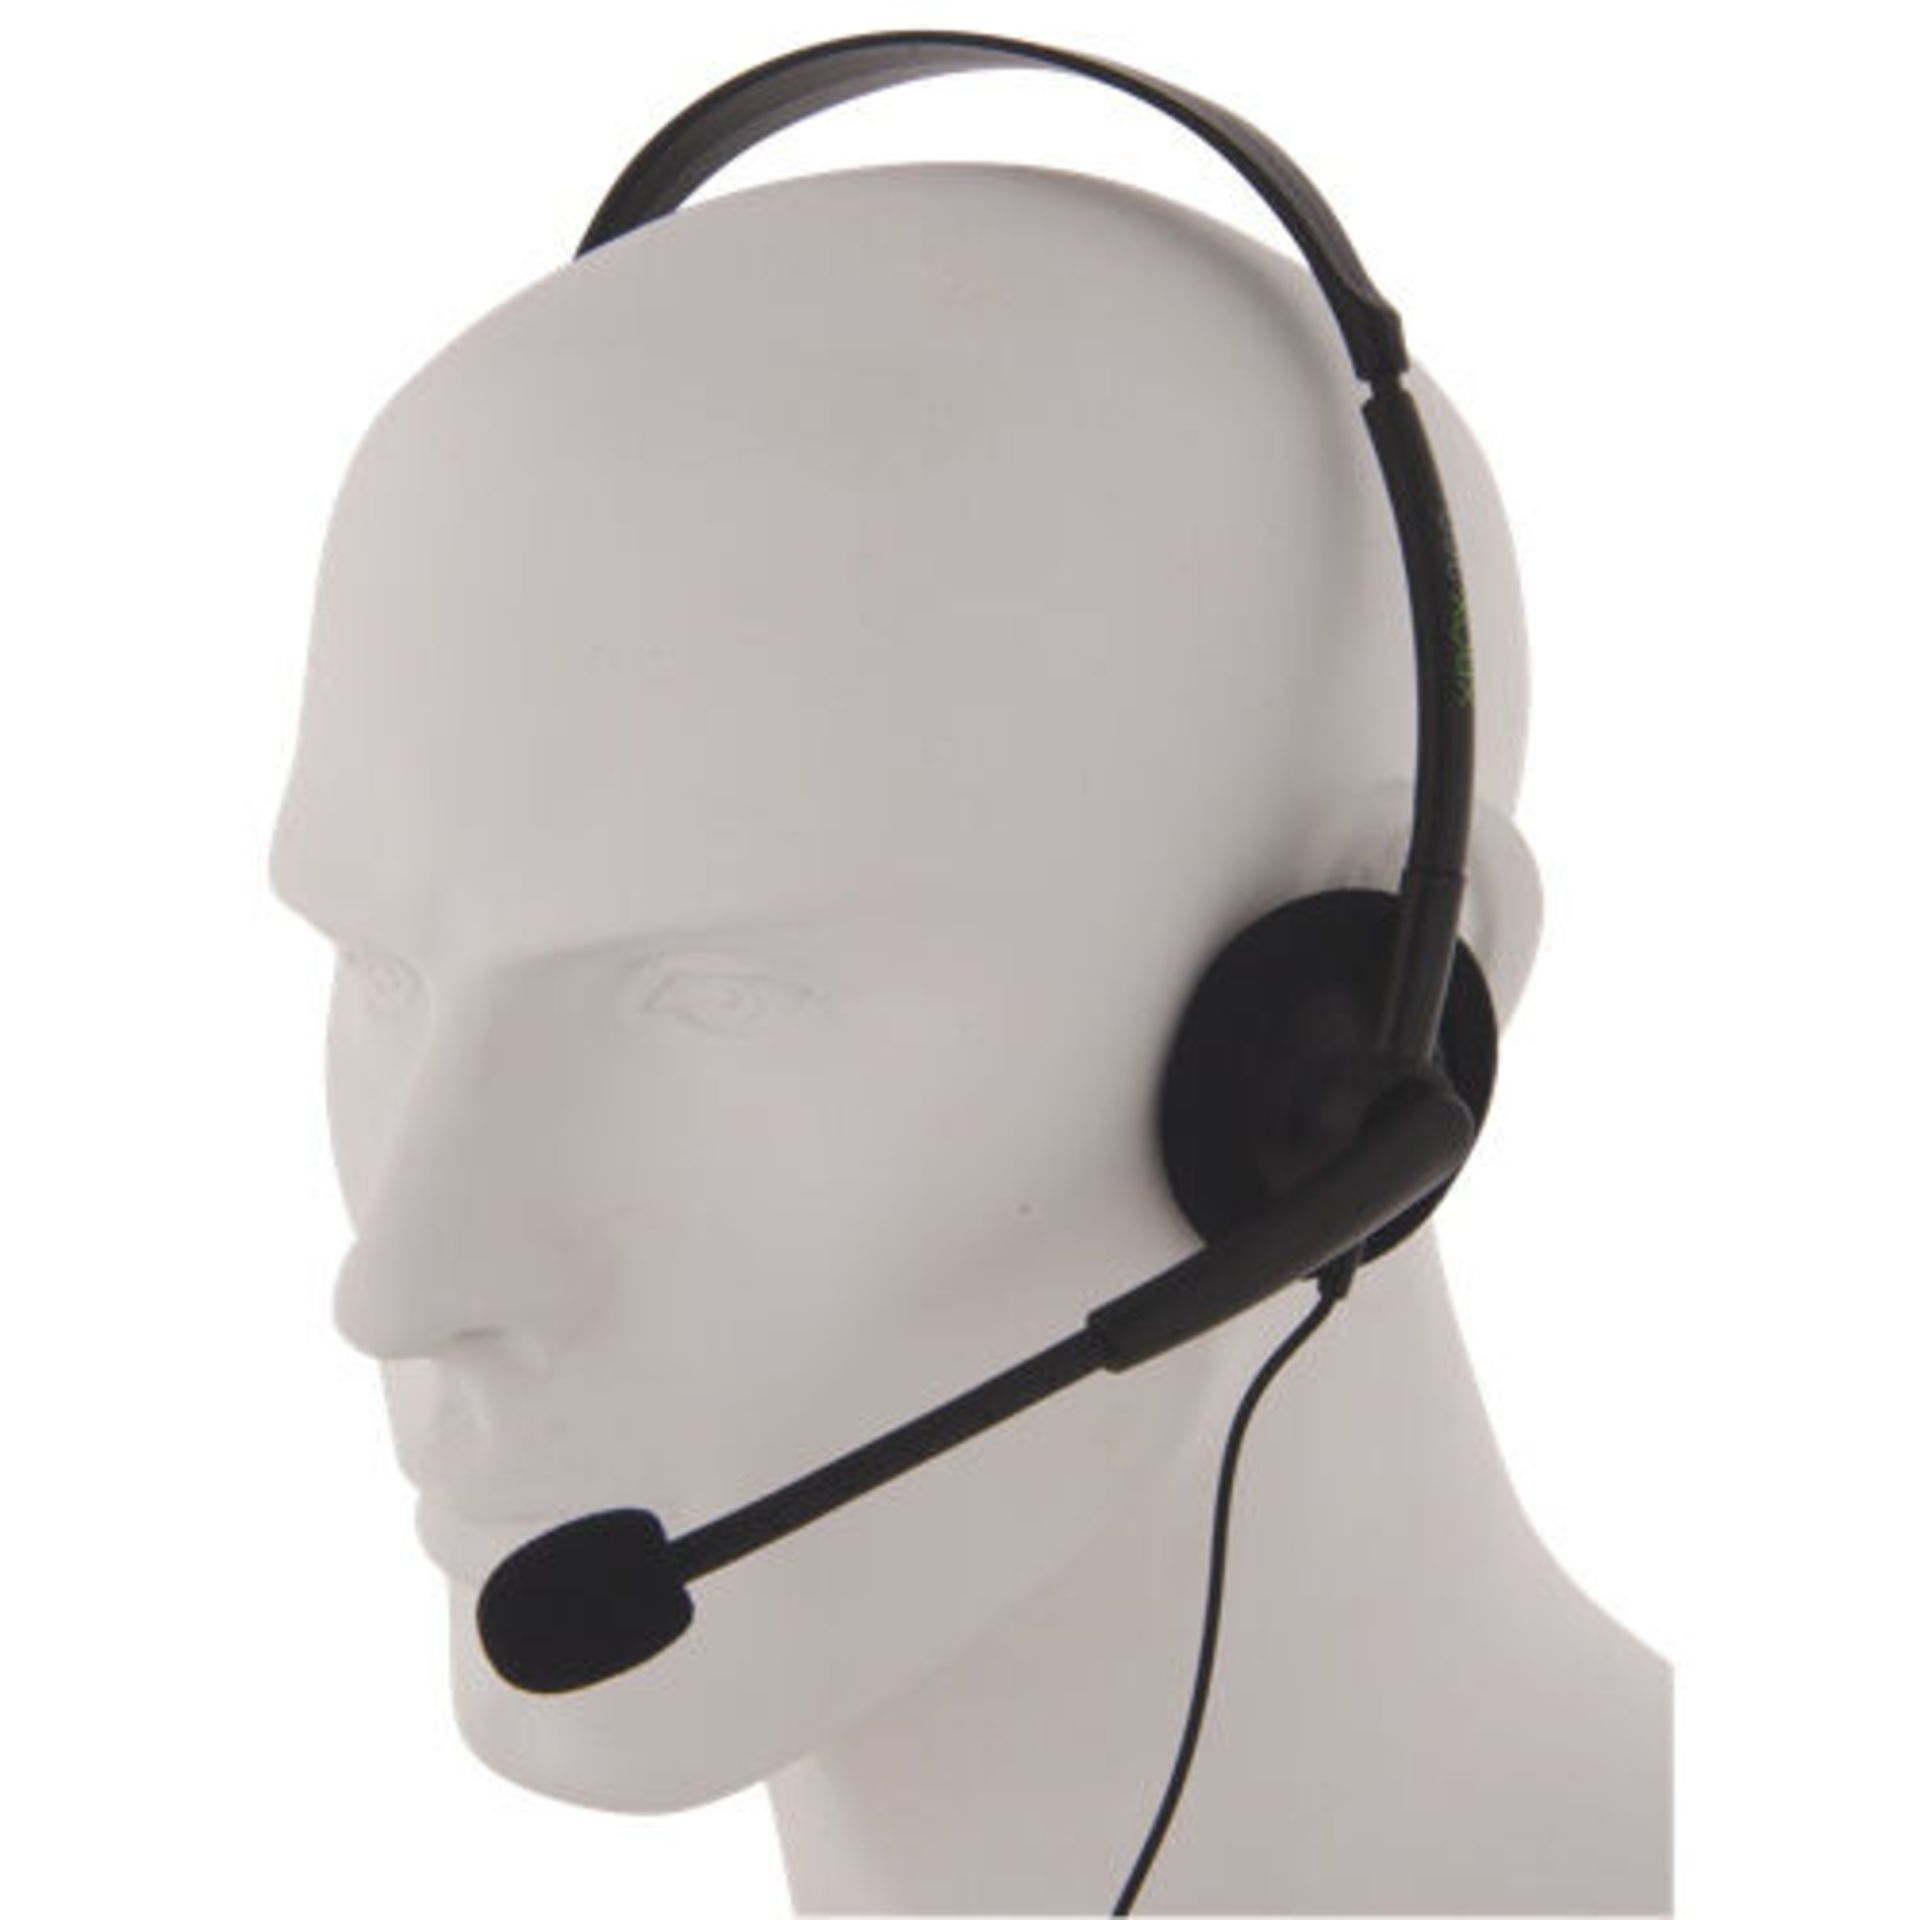 500 X OFFICIAL XBOX 360 NEW LIVE ONLINE CHAT HEADSET WITH MIC GAMING HEADPHONES 2.5MM AUX - Image 3 of 5